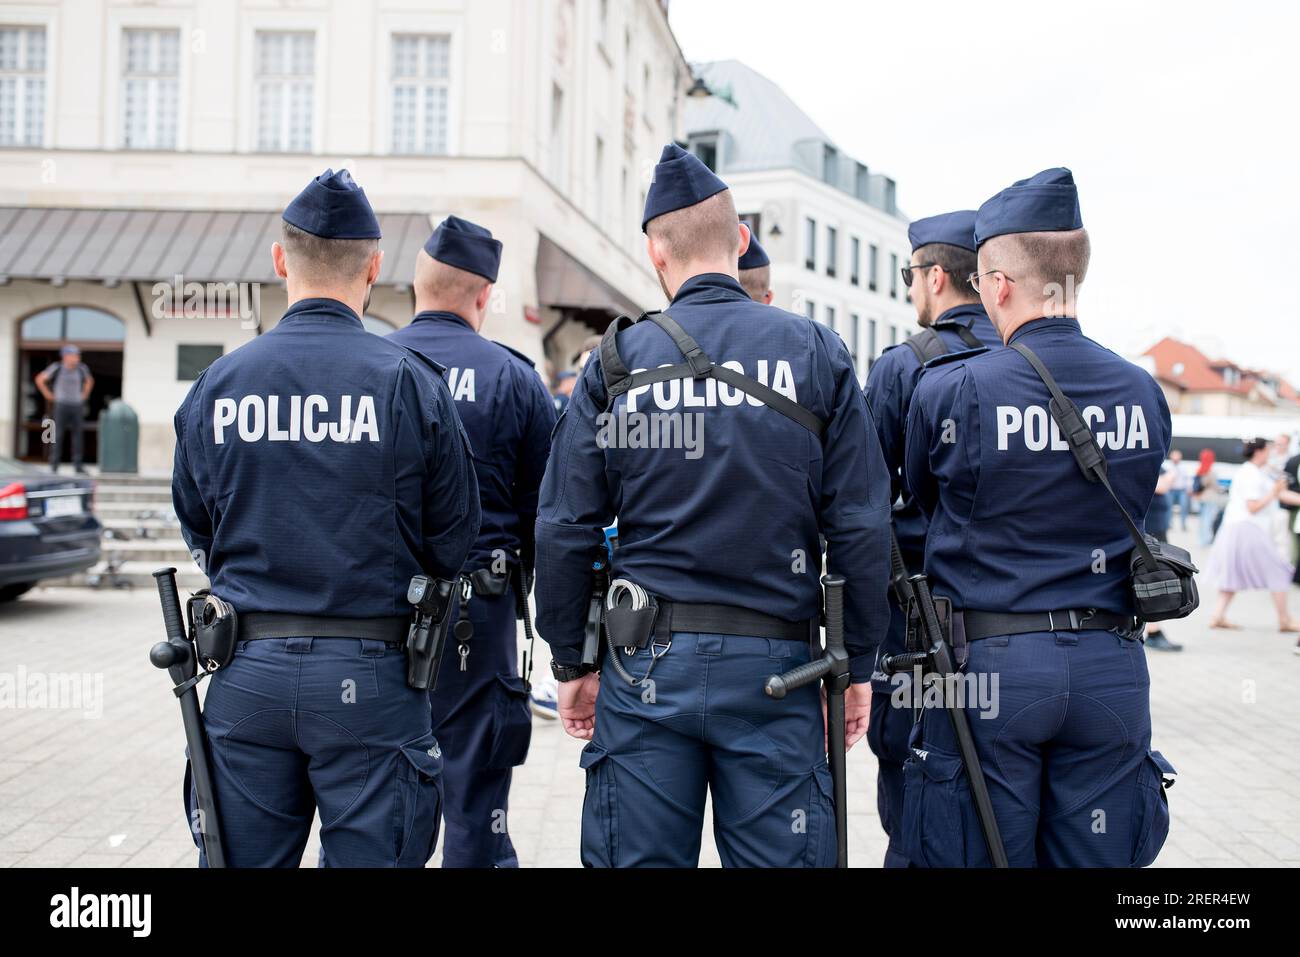 Polish policemen stand with their backs to the camera. Stock Photo